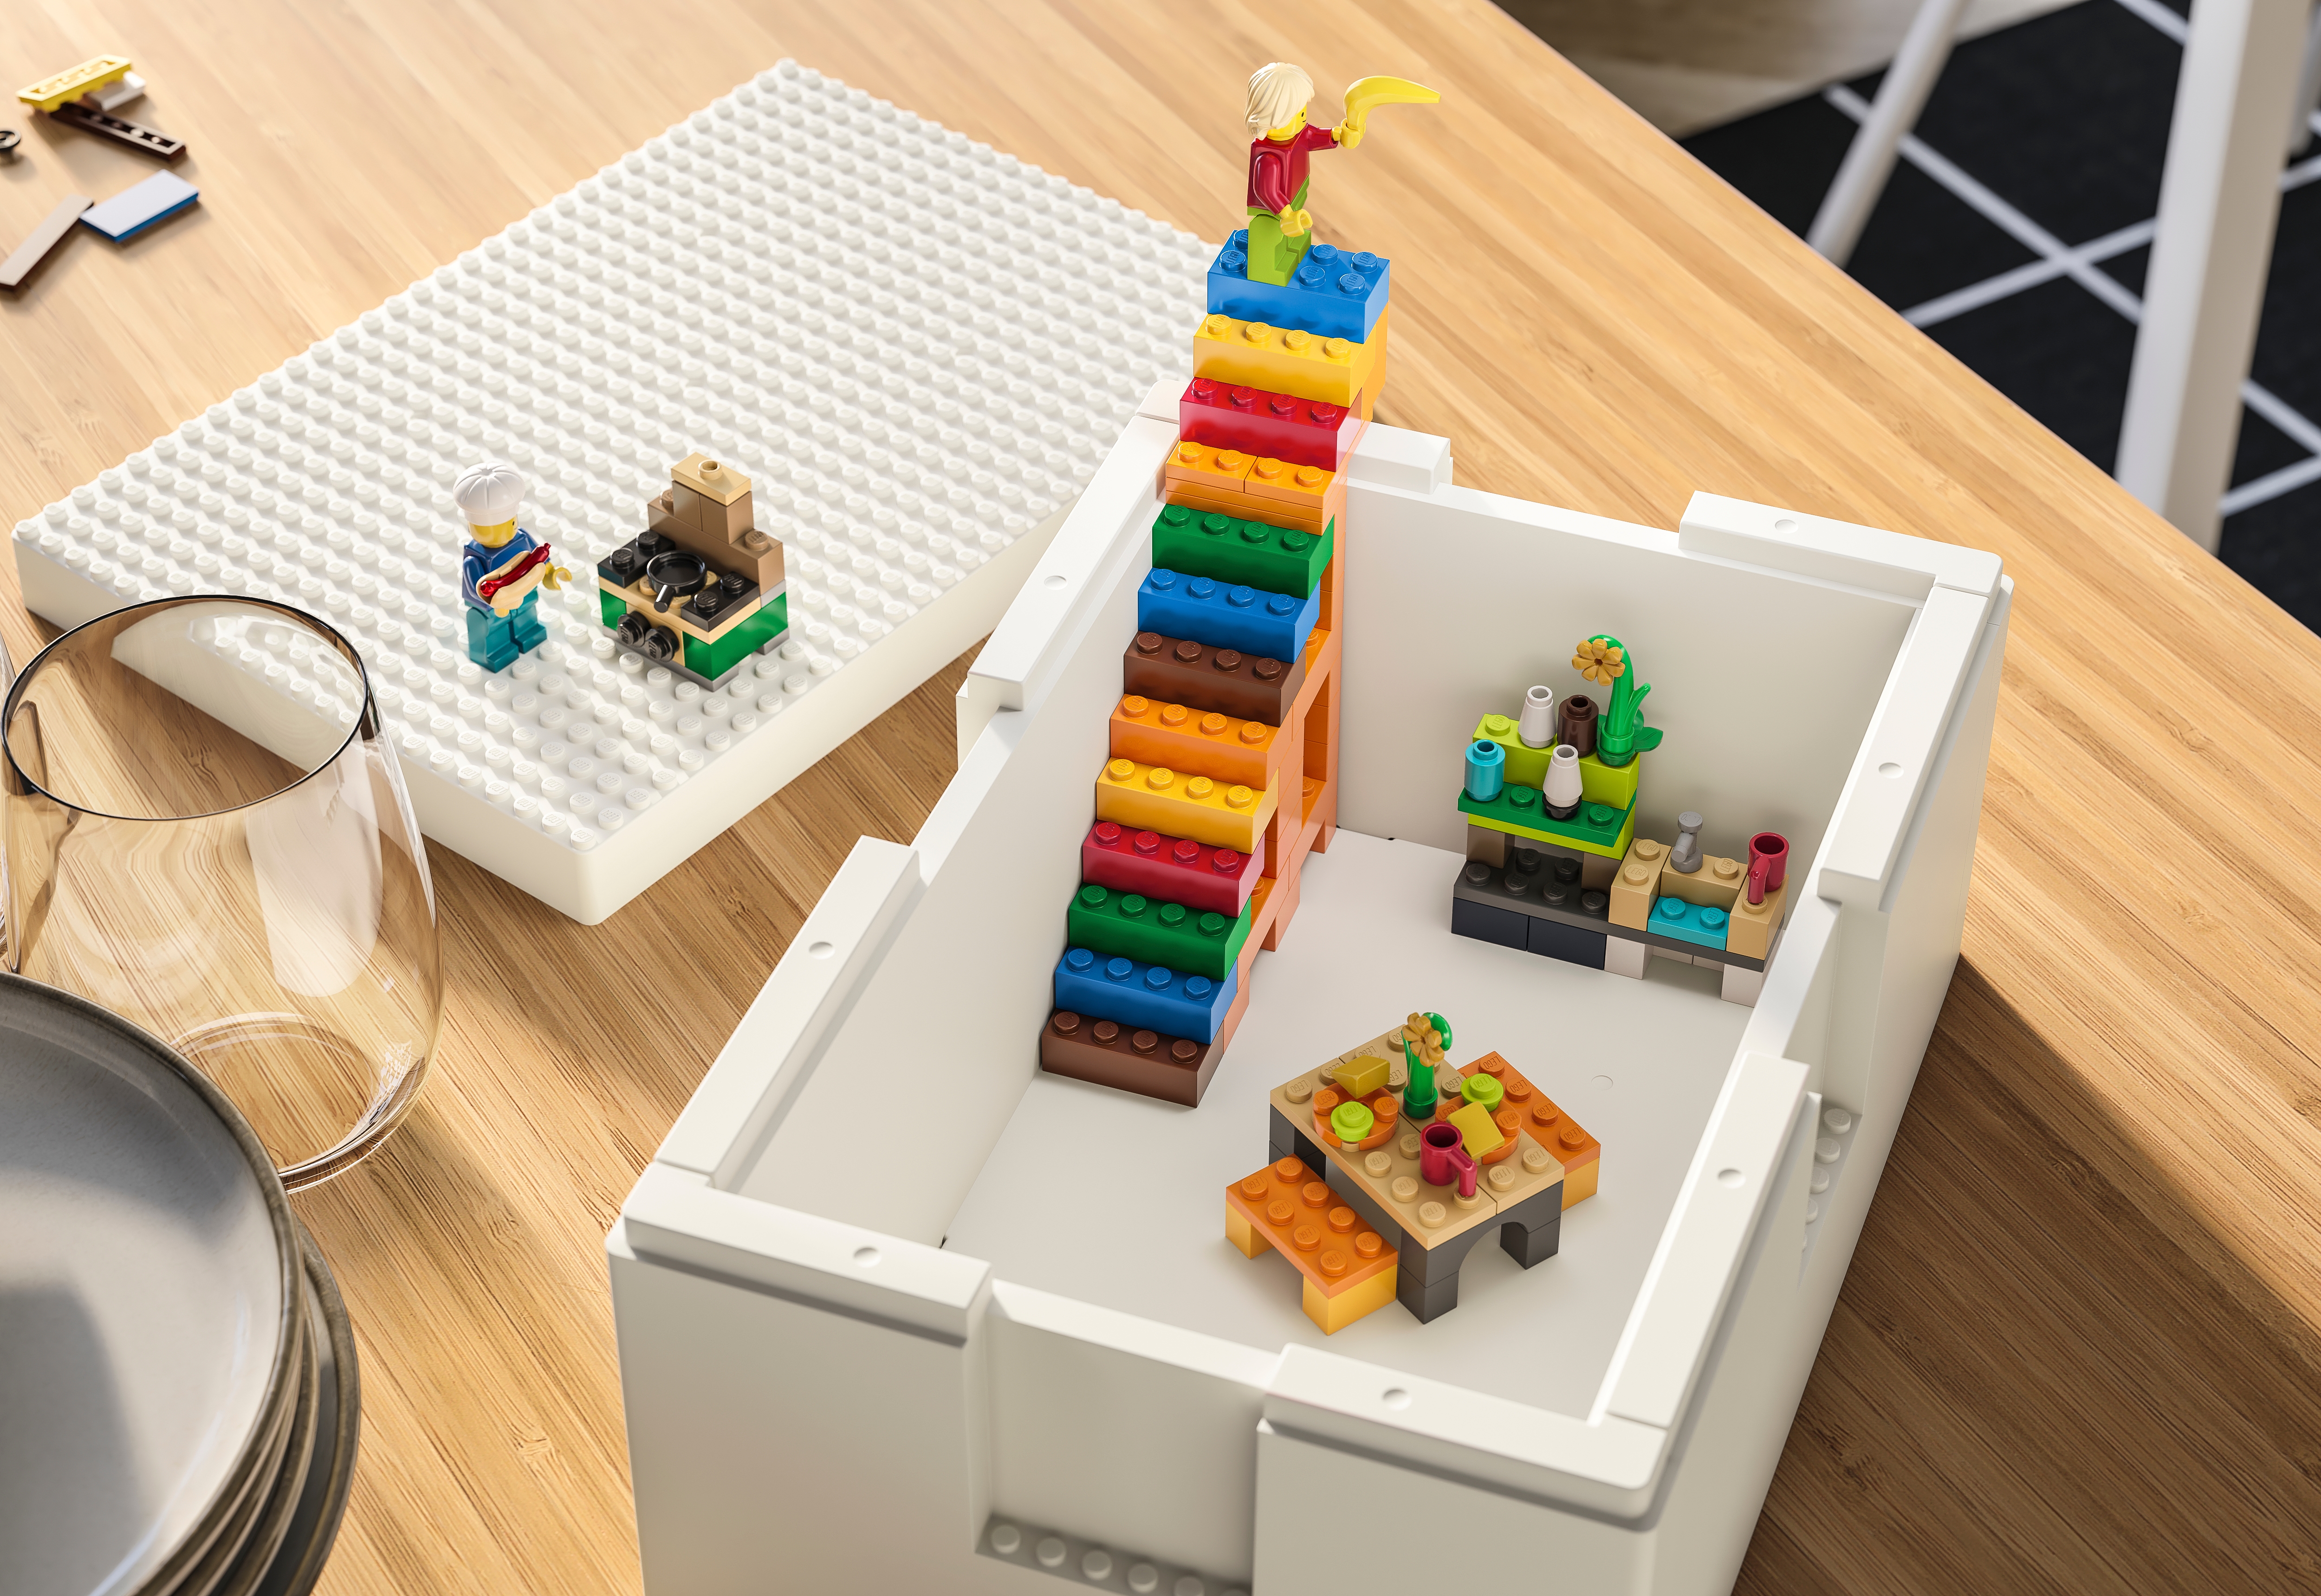 Amazing LEGO Sorter Box  Amazing LEGO sorter box! Created by